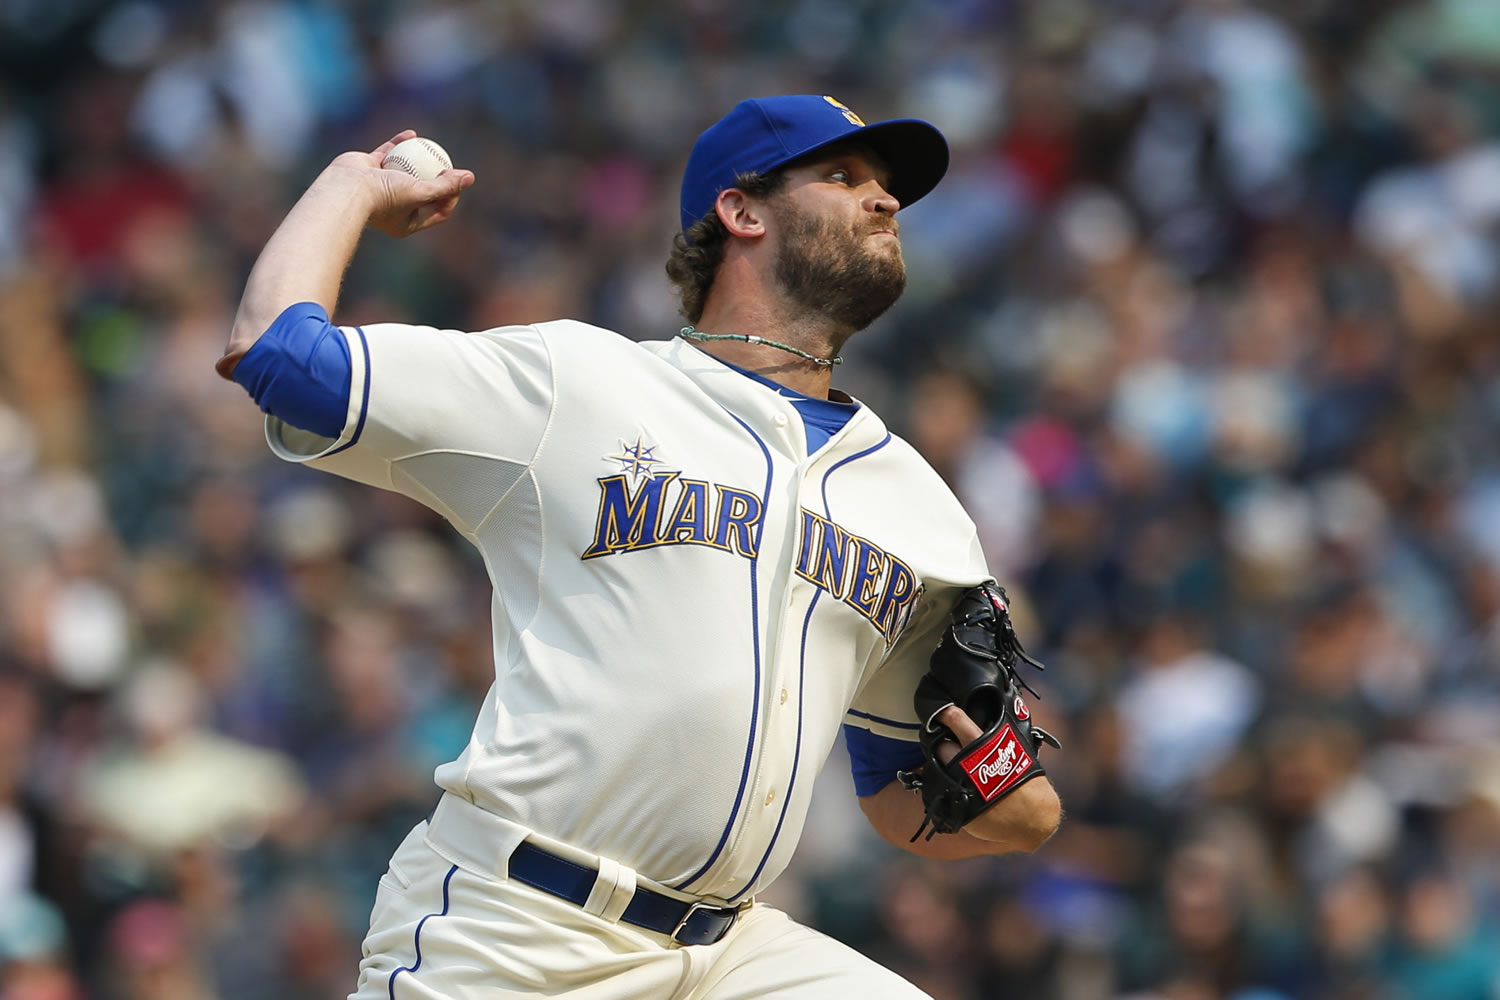 The Seattle Mariners traded pitcher Tom Wilhelmsen to the Texas Rangers for outfielder Leonys Martin on Monday, Nov. 16, 2015.